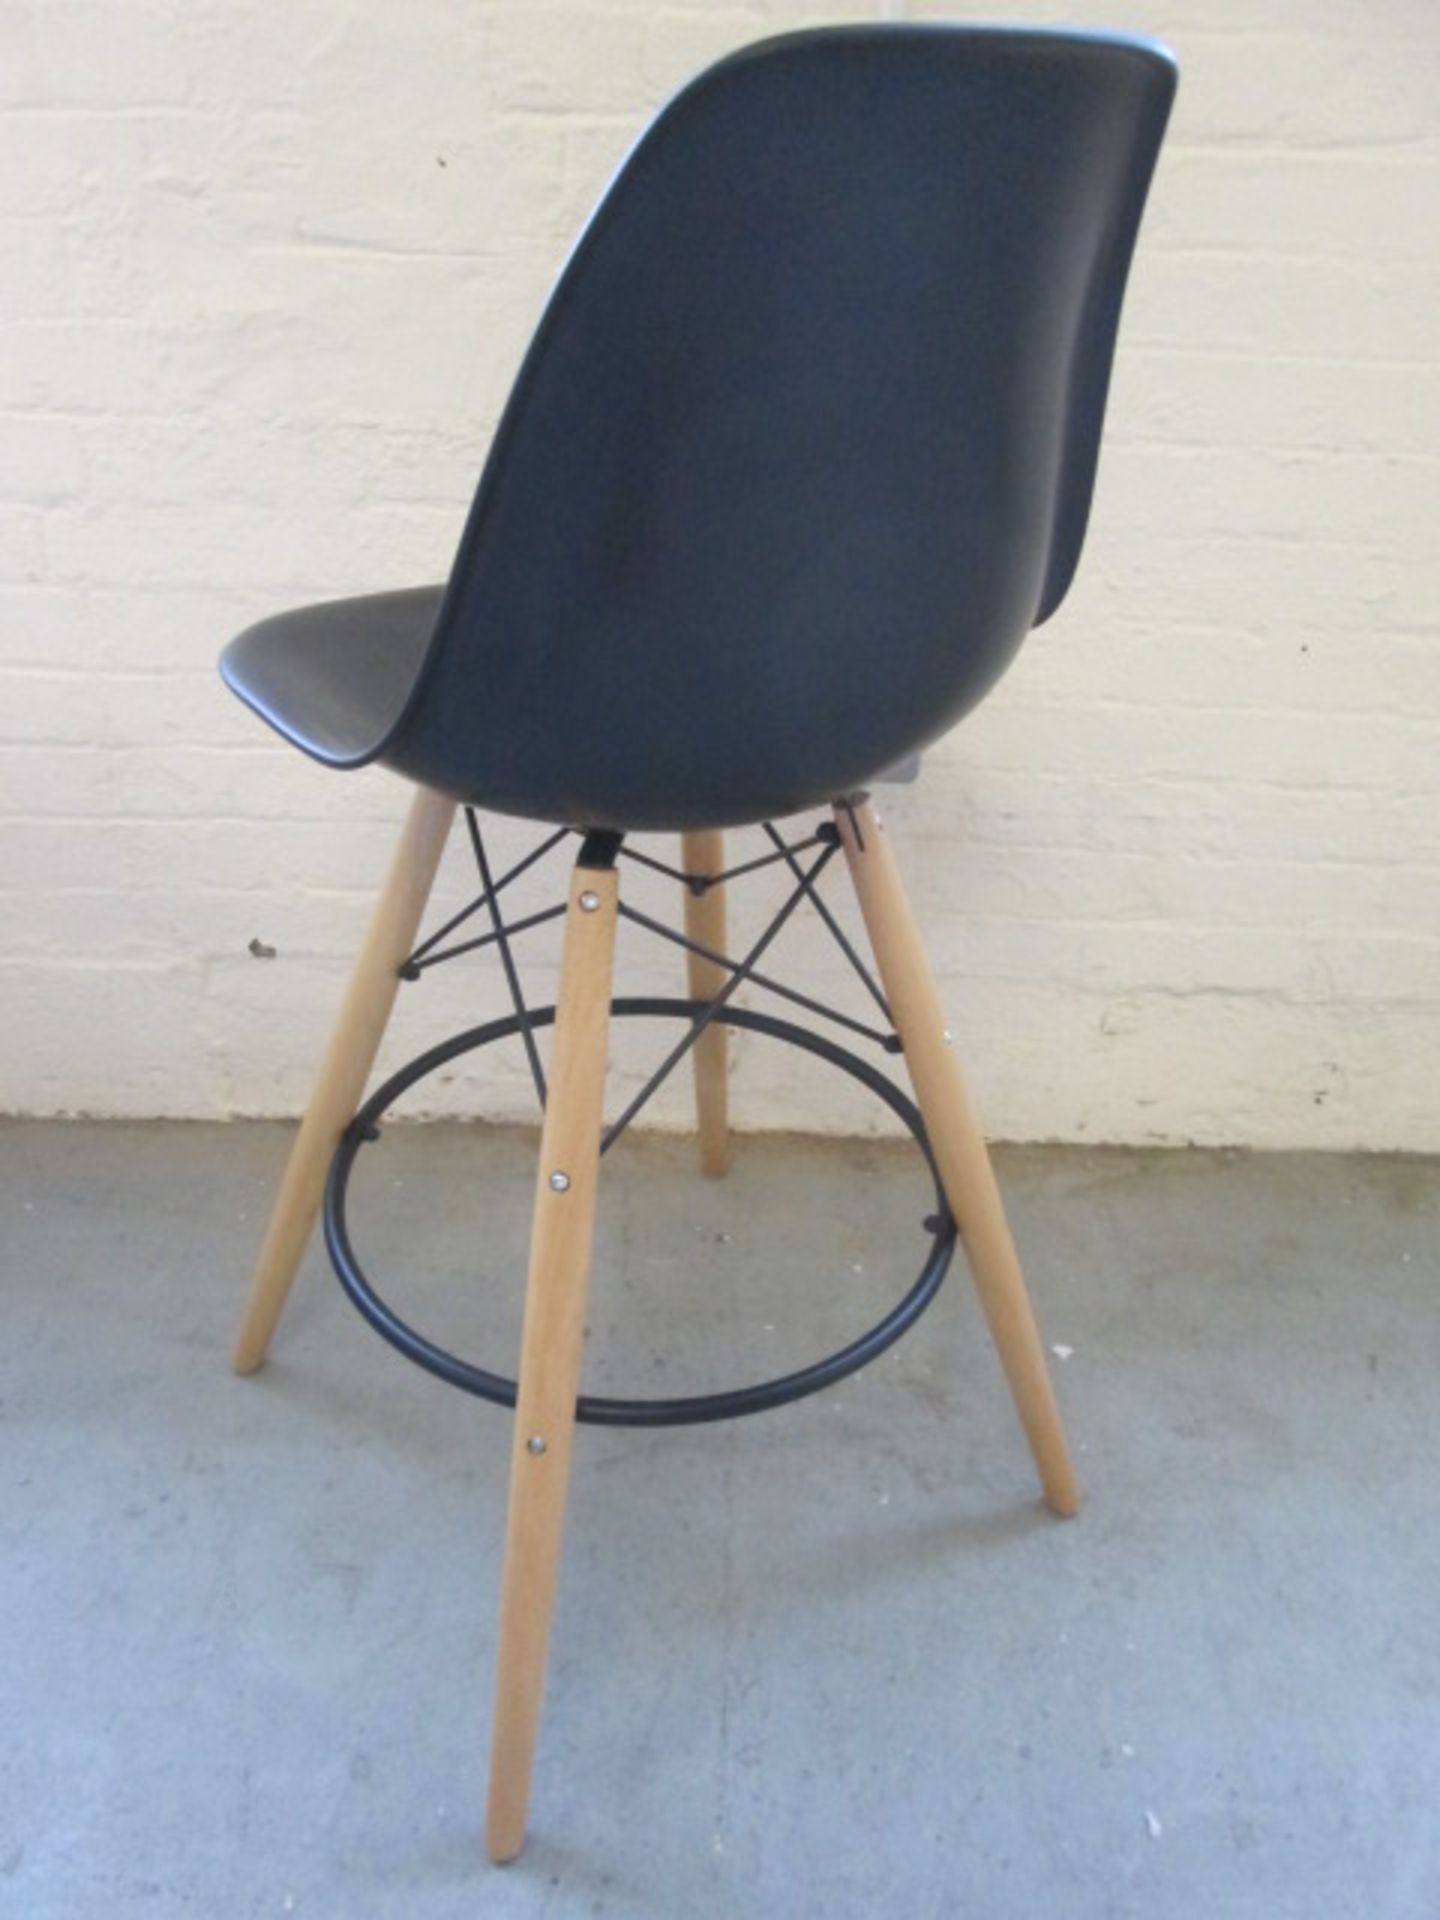 As New: Black DSW Bar Stool in Charles Eames Style in Polypropylene Matt. - Image 2 of 2